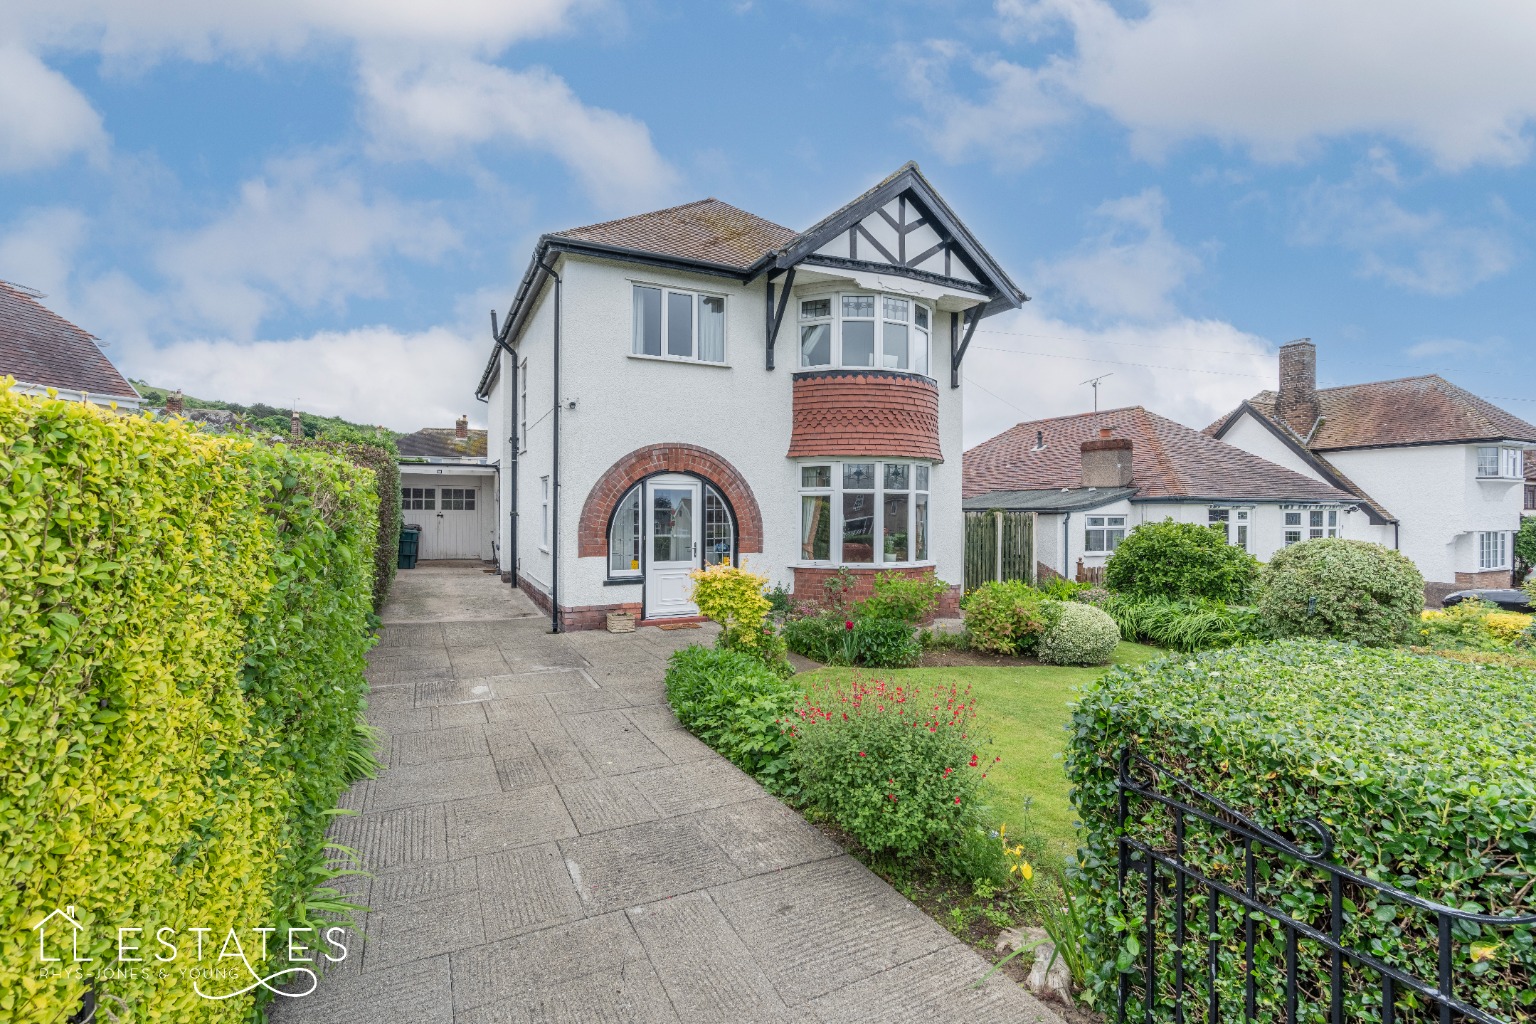 4 bed detached house for sale in Brewis Road, Colwyn Bay - Property Image 1